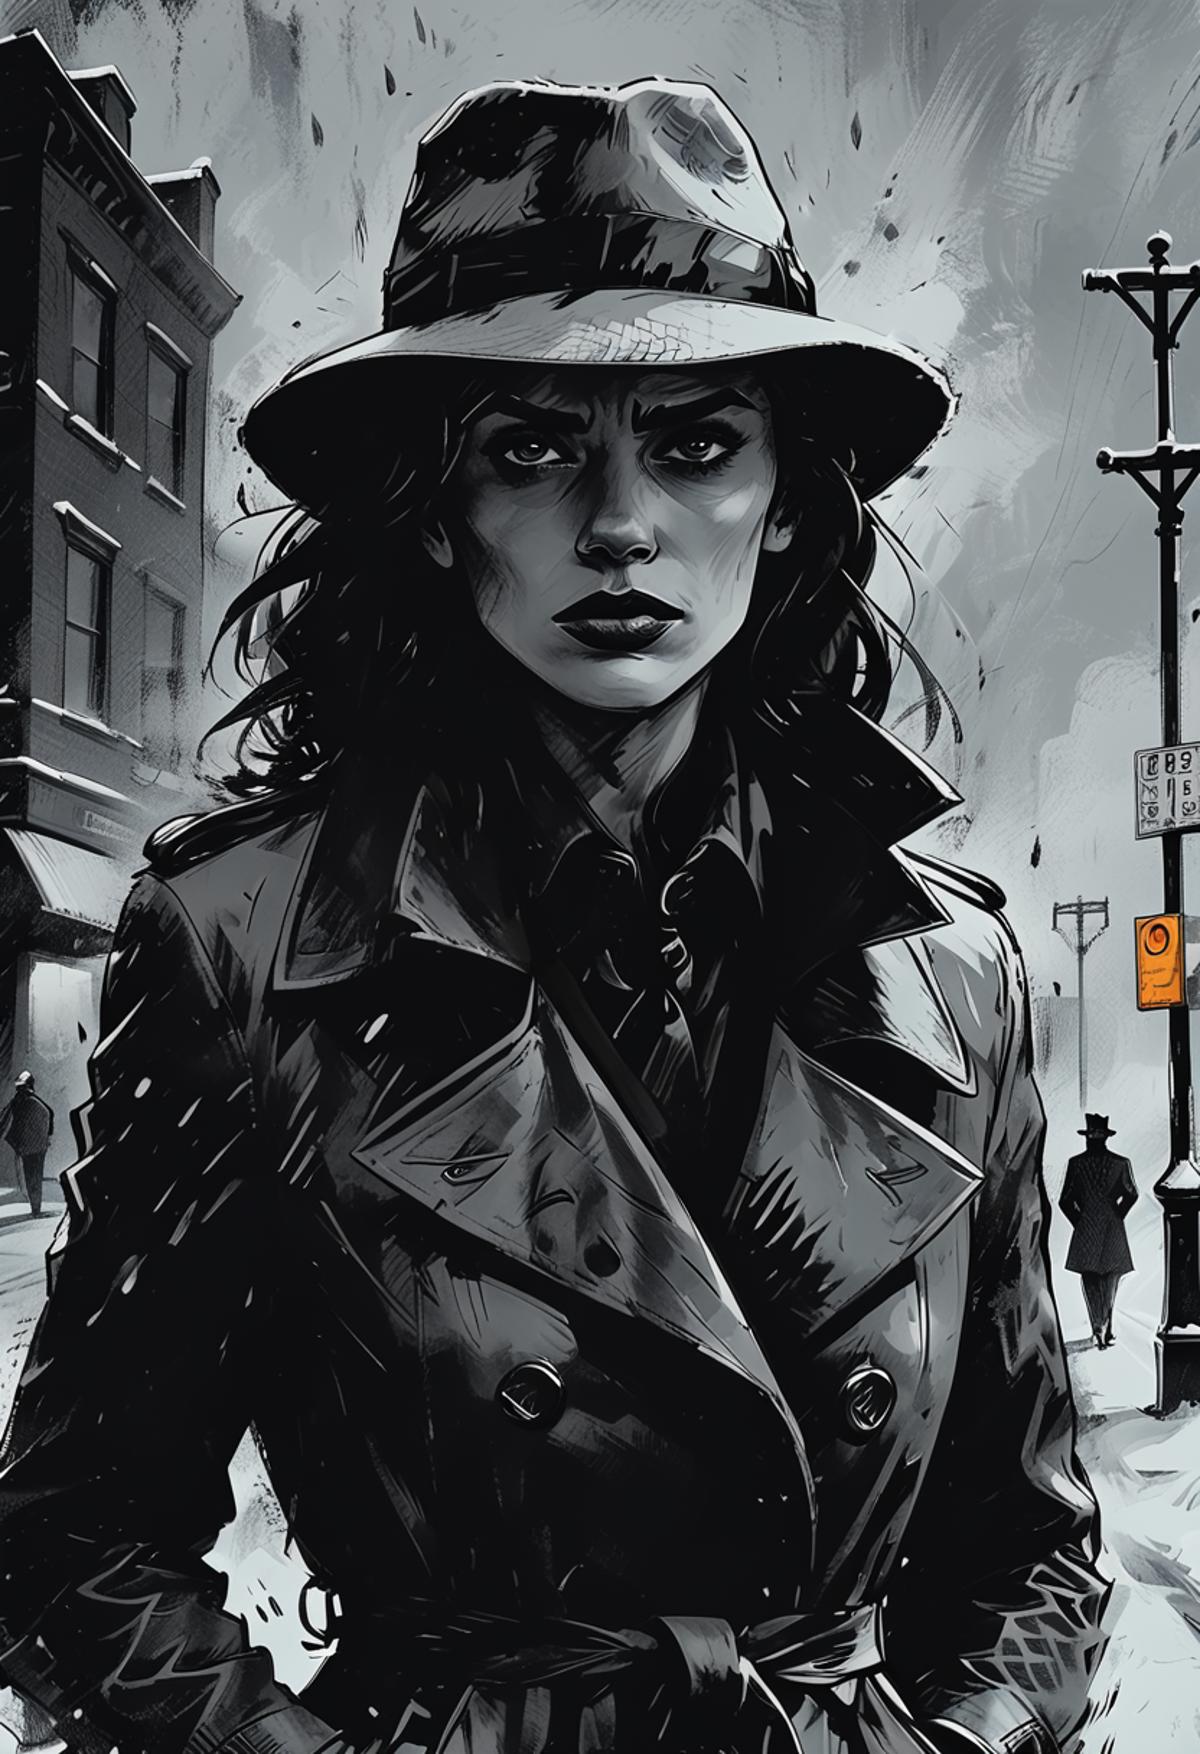 A woman wearing a trench coat and hat, with her mouth set and looking away, stands on a snowy city street.